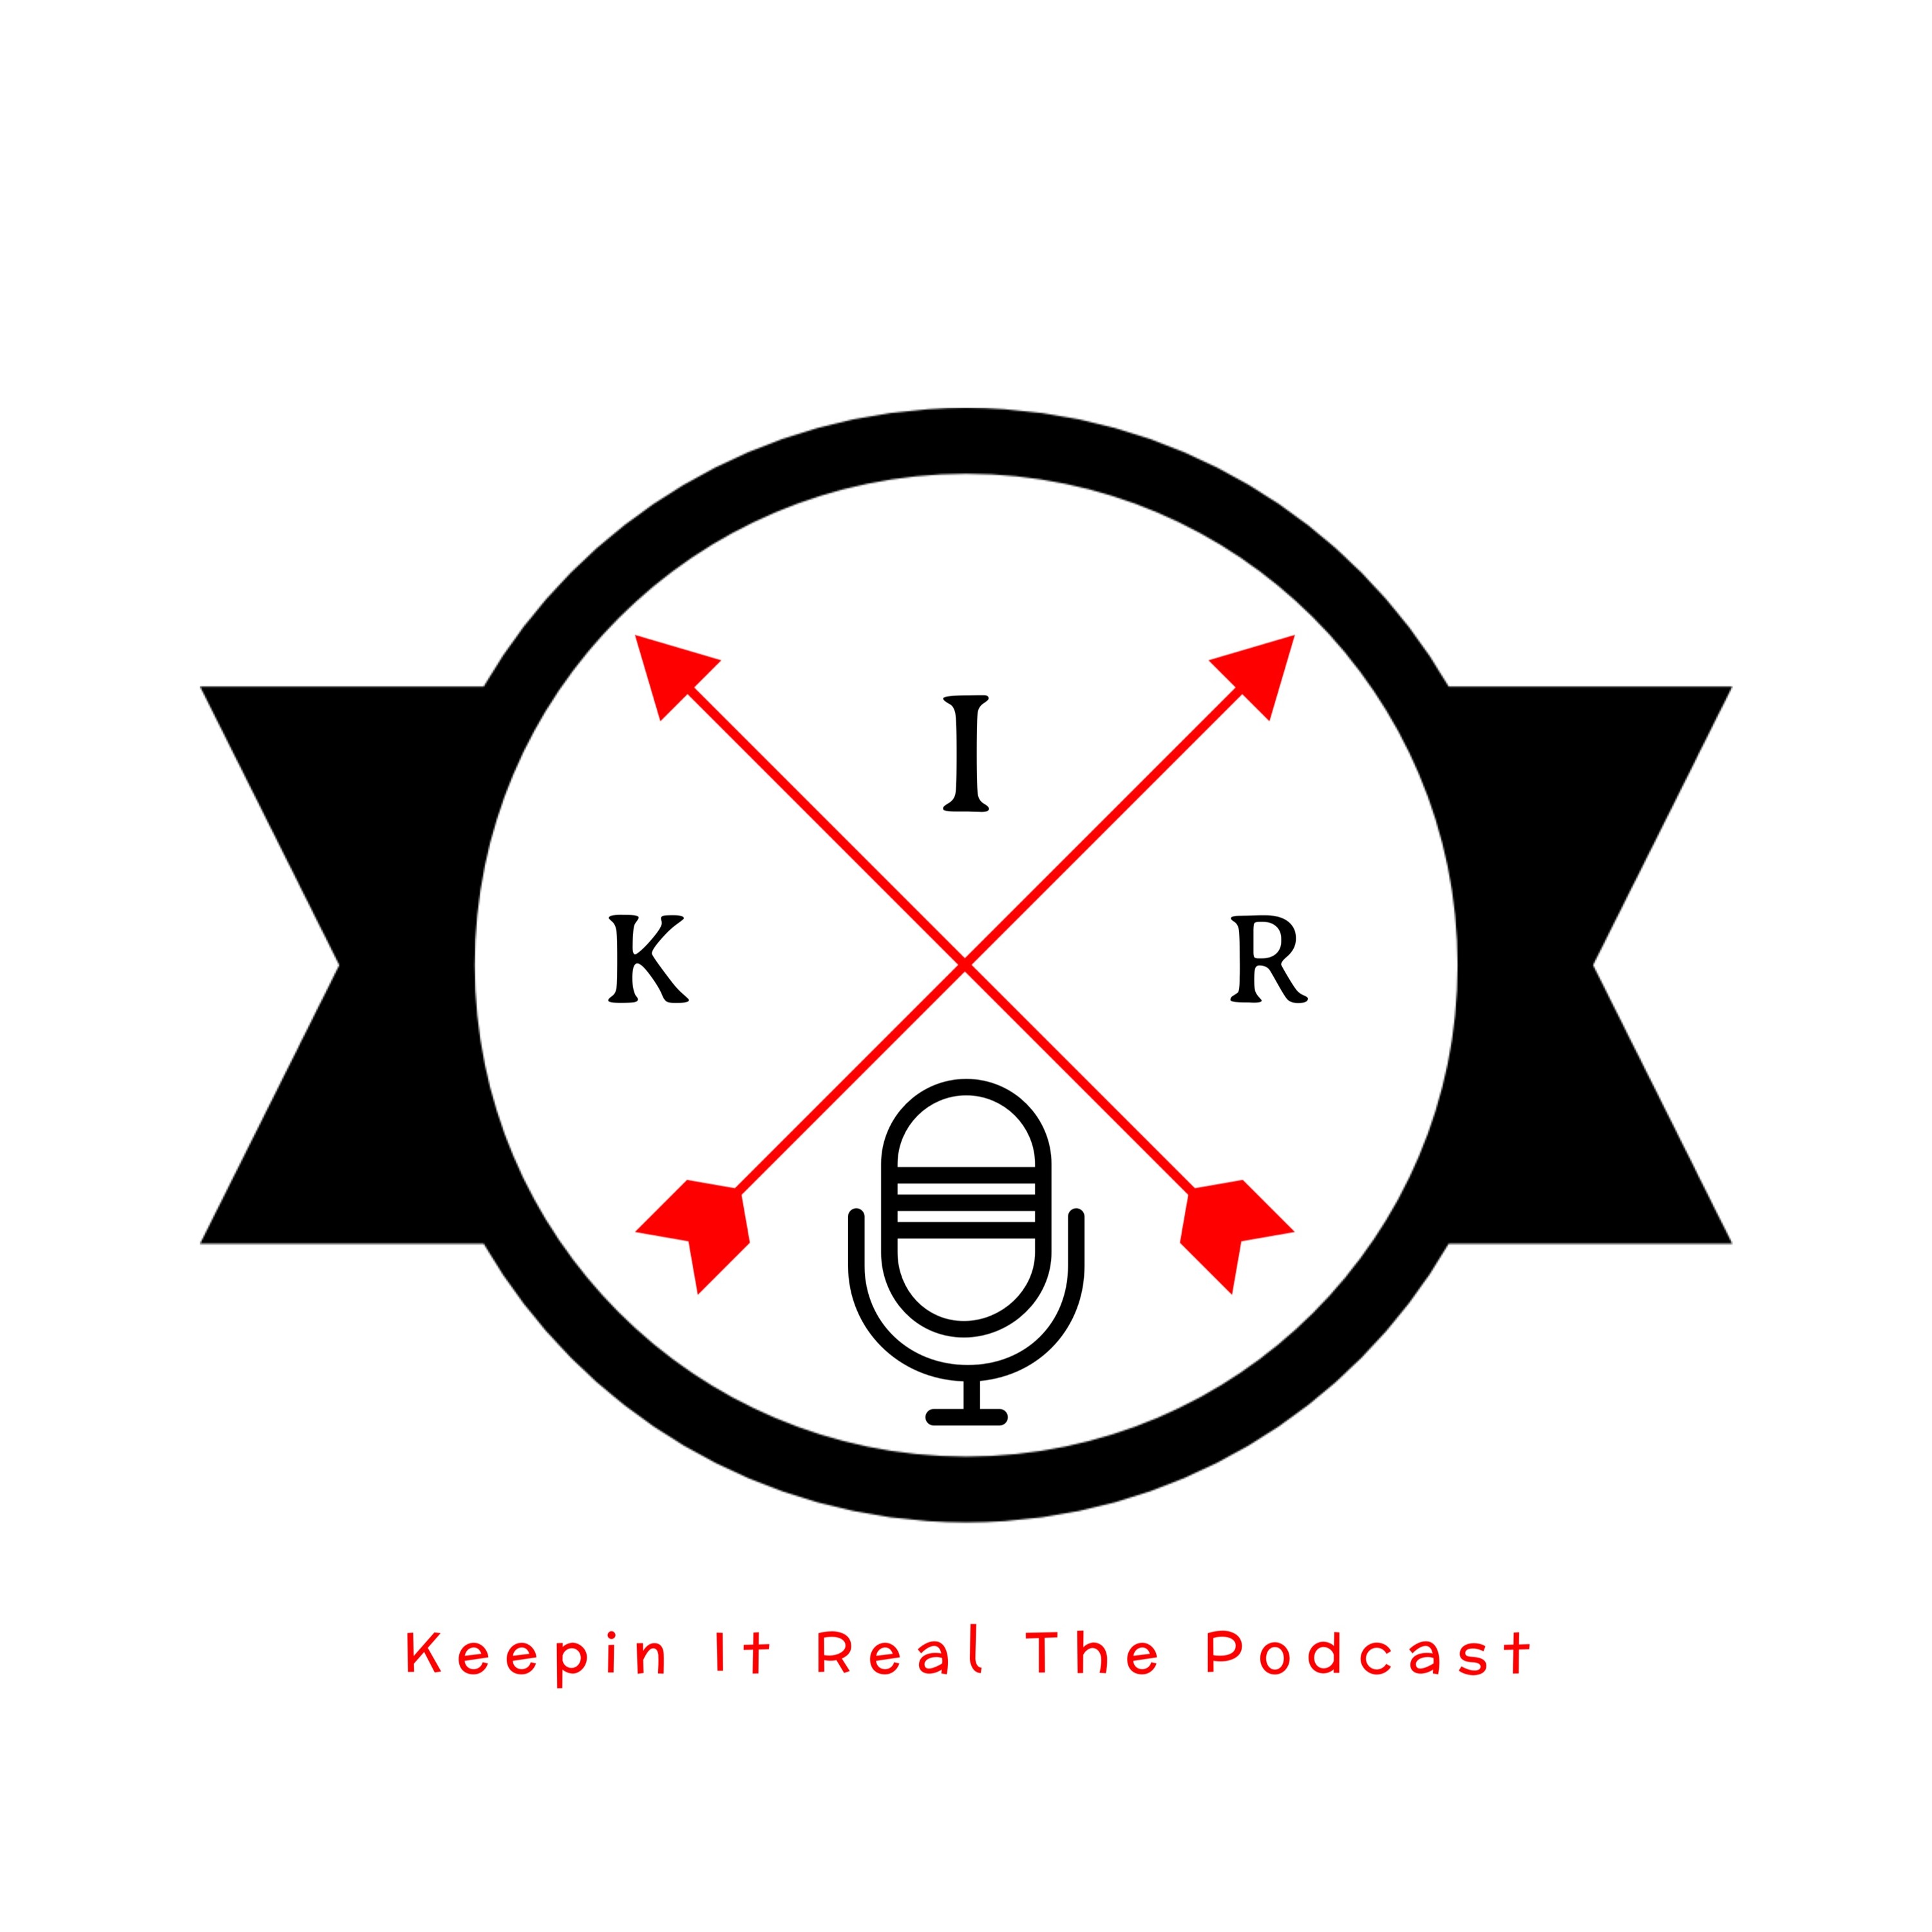 Keepin It Real The Podcast Season 2 Ep. 1